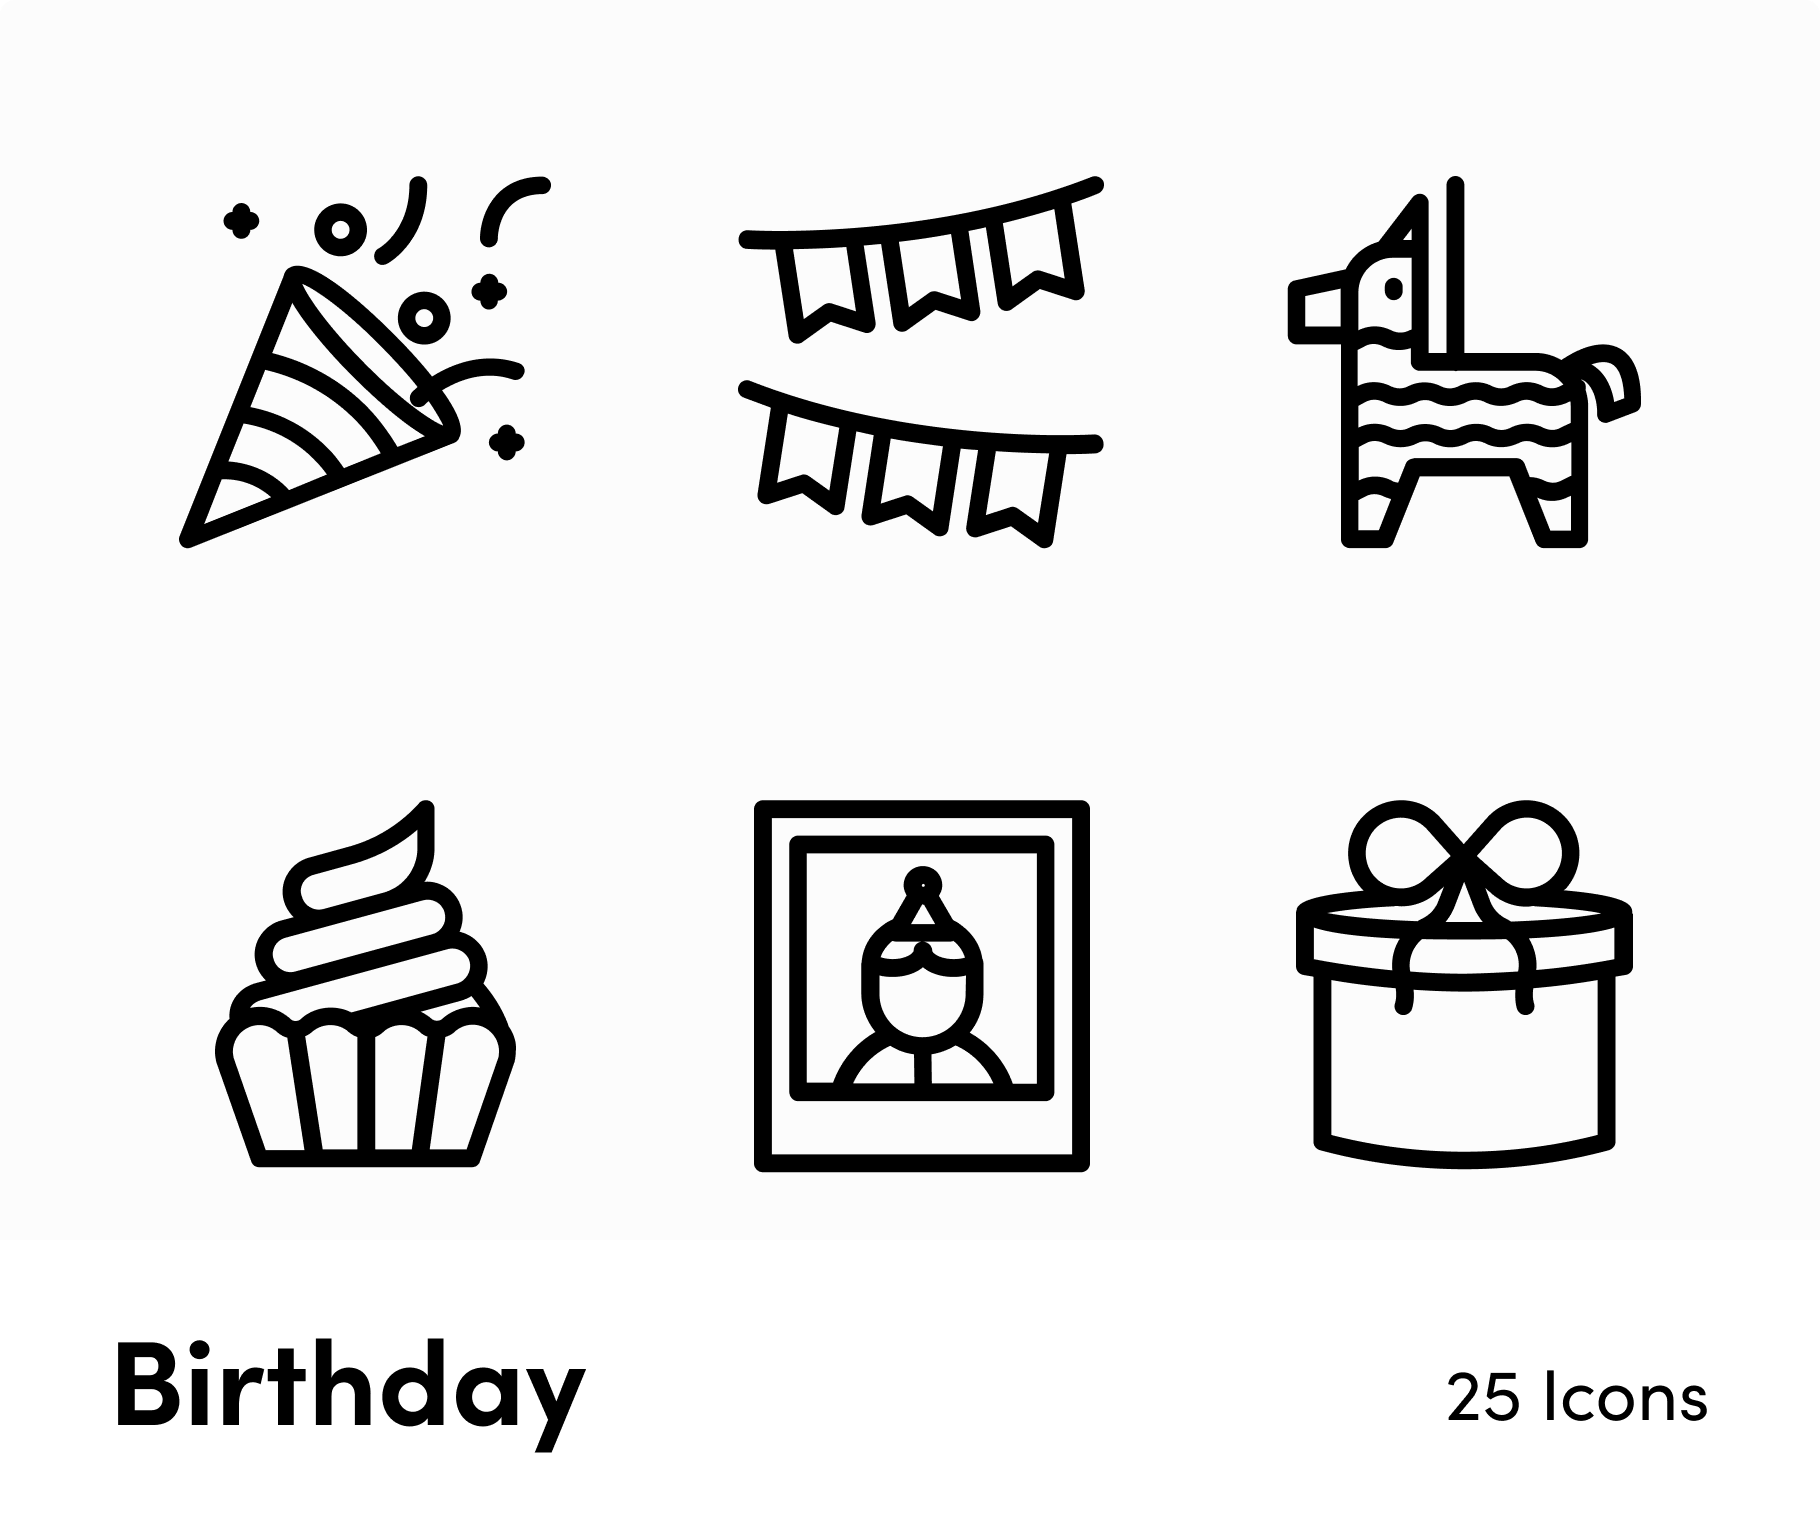 Candles on Birthday Cake Template